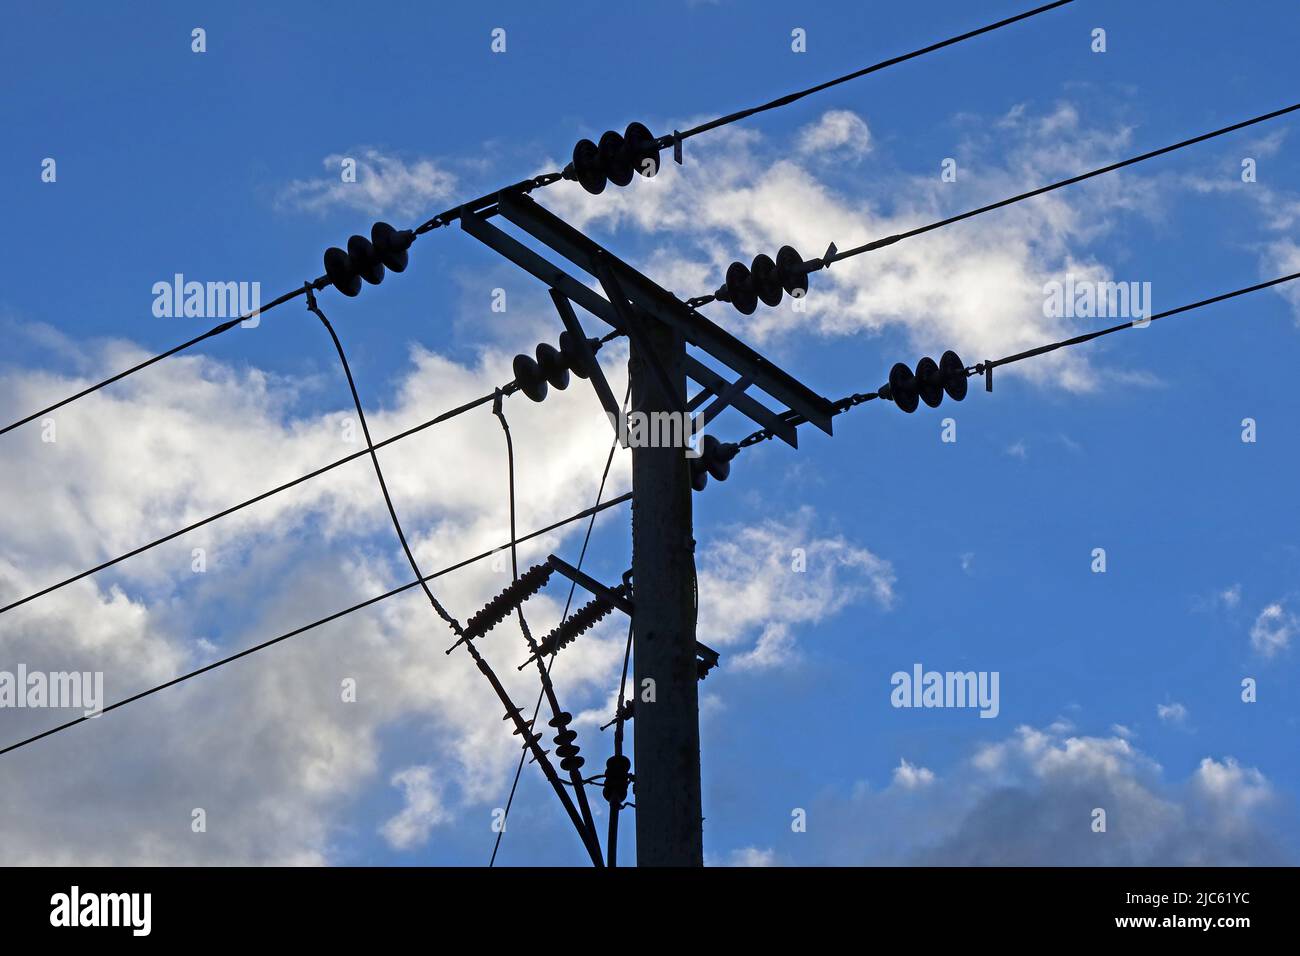 Rural three phase electrical power lines distribution, with insulators against a blue cloudy sky, Cheshire, England, UK, WA4 Stock Photo